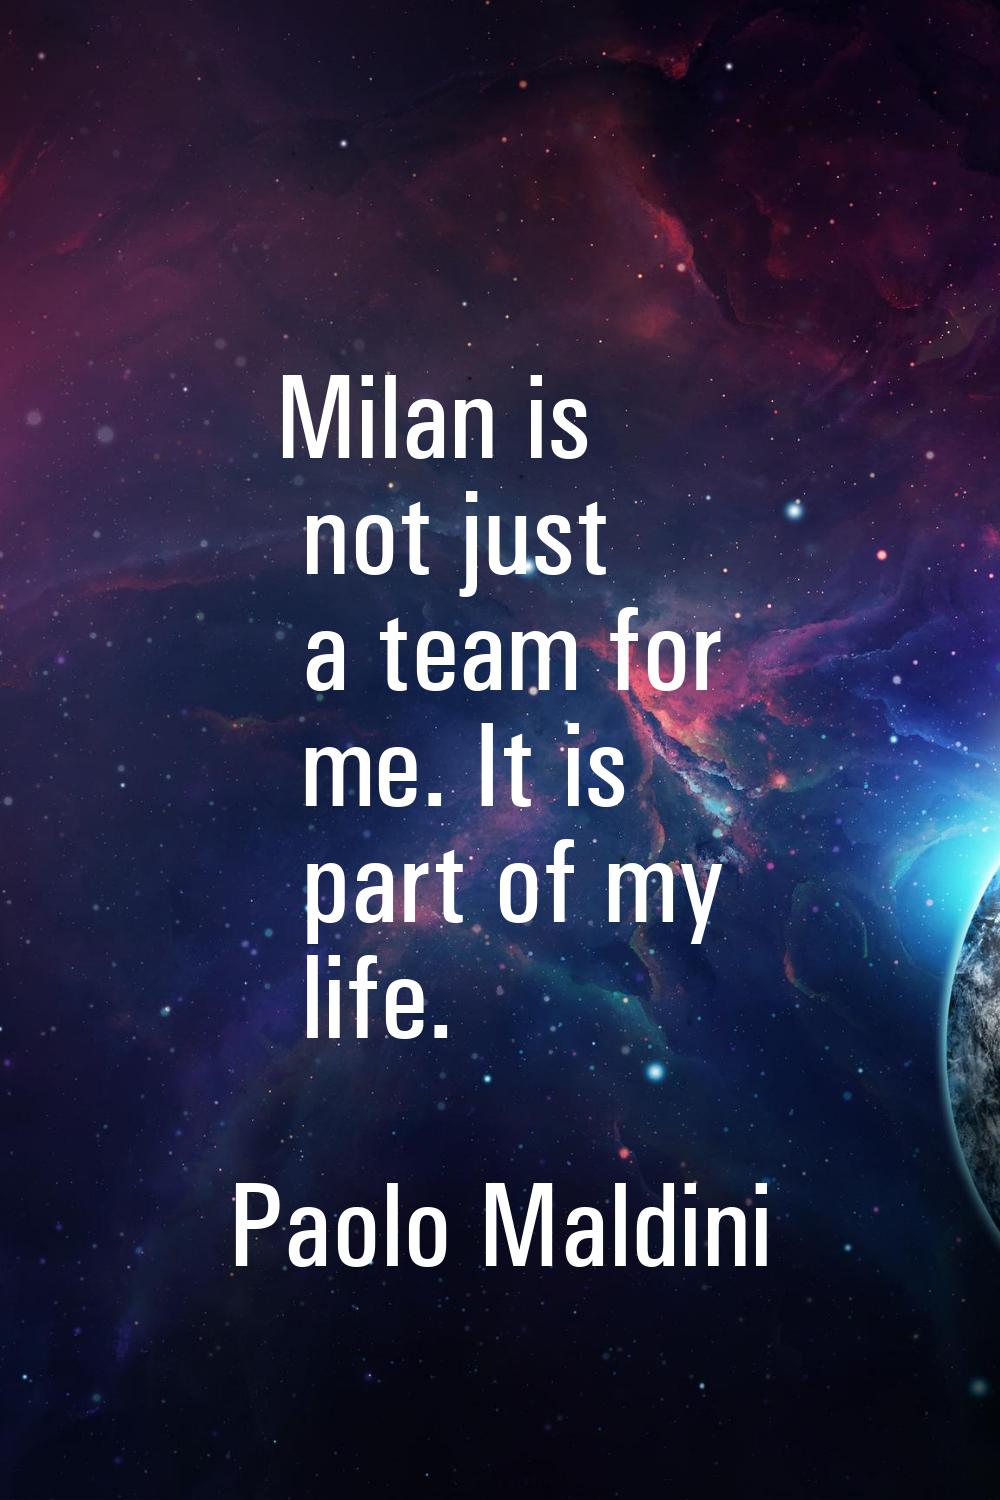 Milan is not just a team for me. It is part of my life.